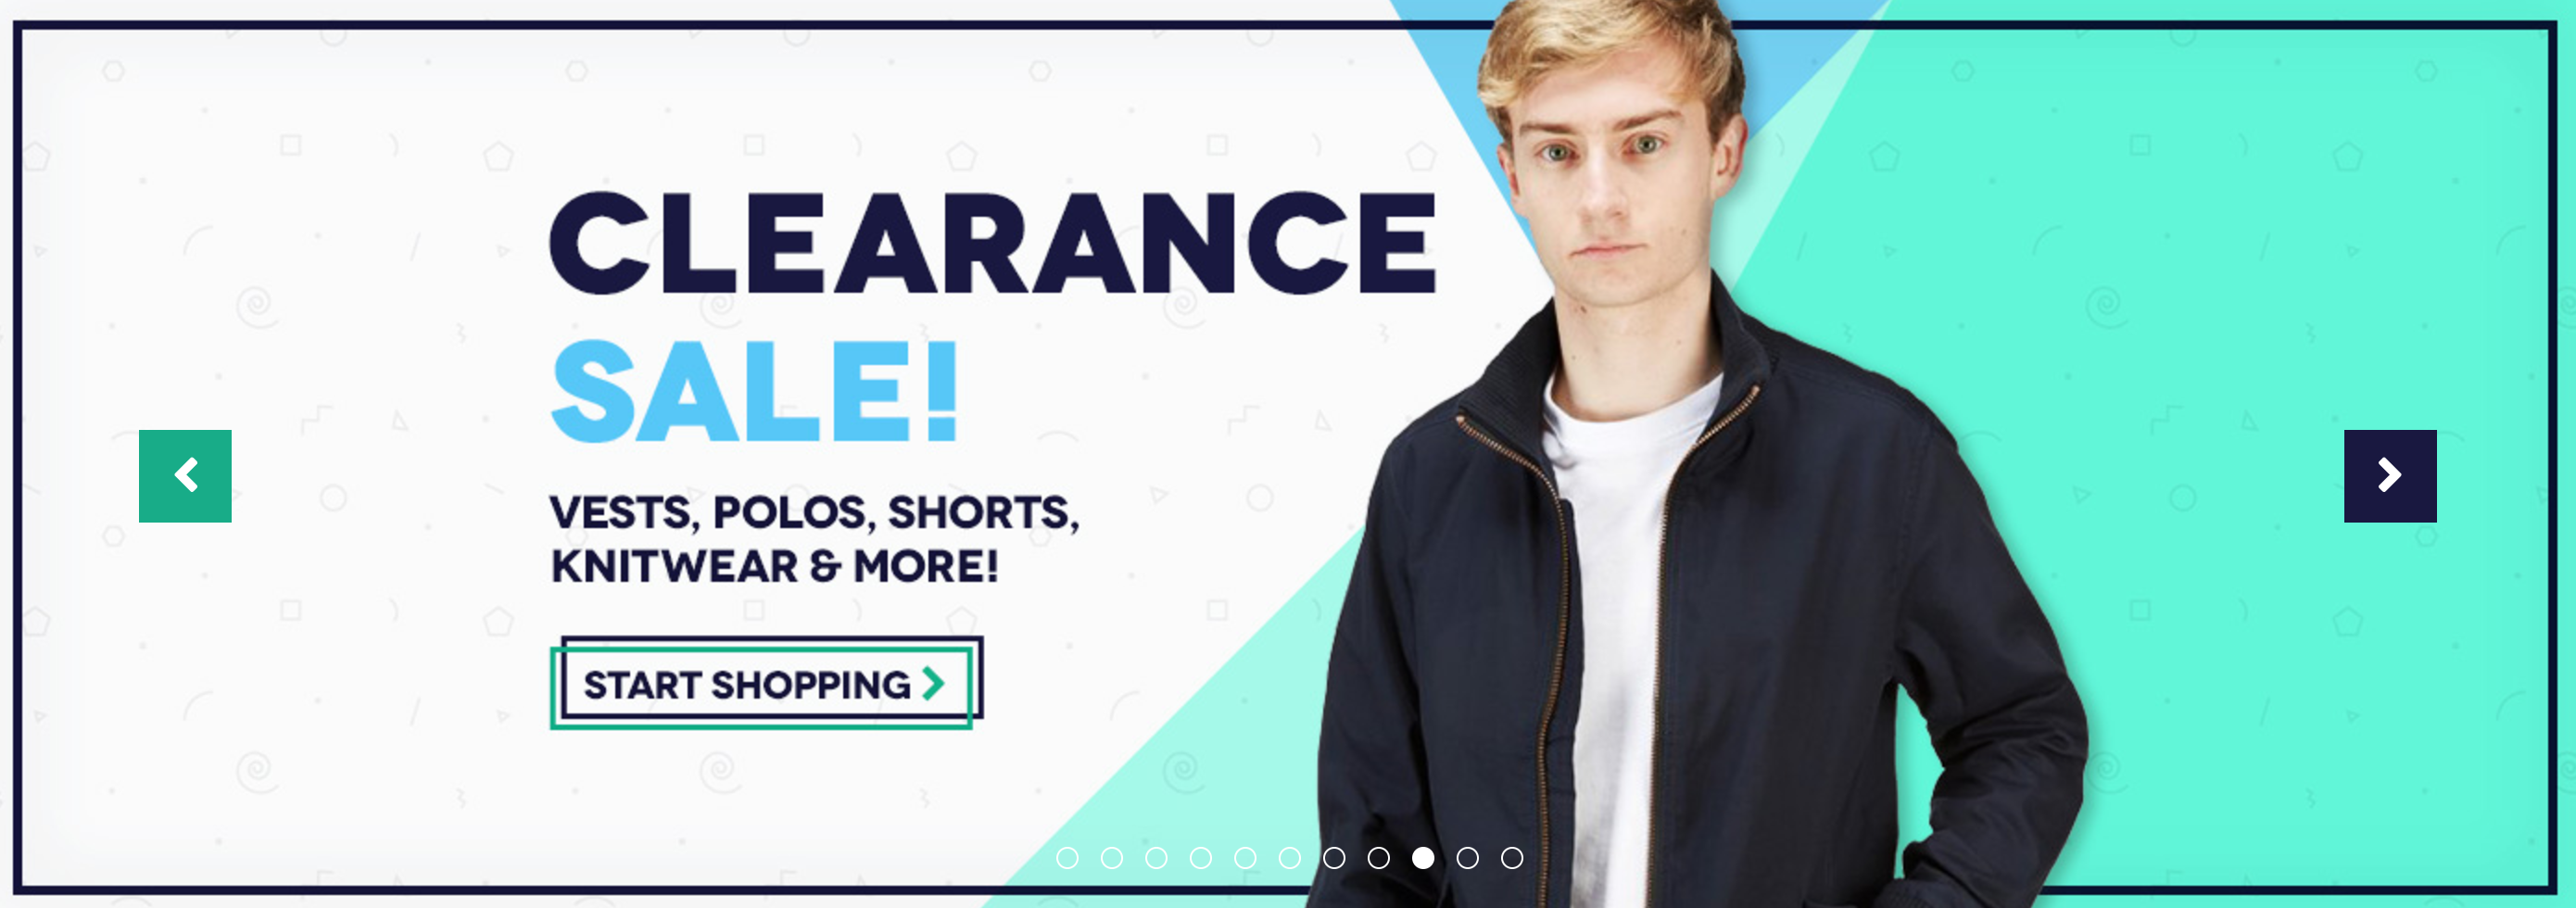 Charles Wilson: Clearance Sale up to 70% off vests, polos, shorts, knitwear & more